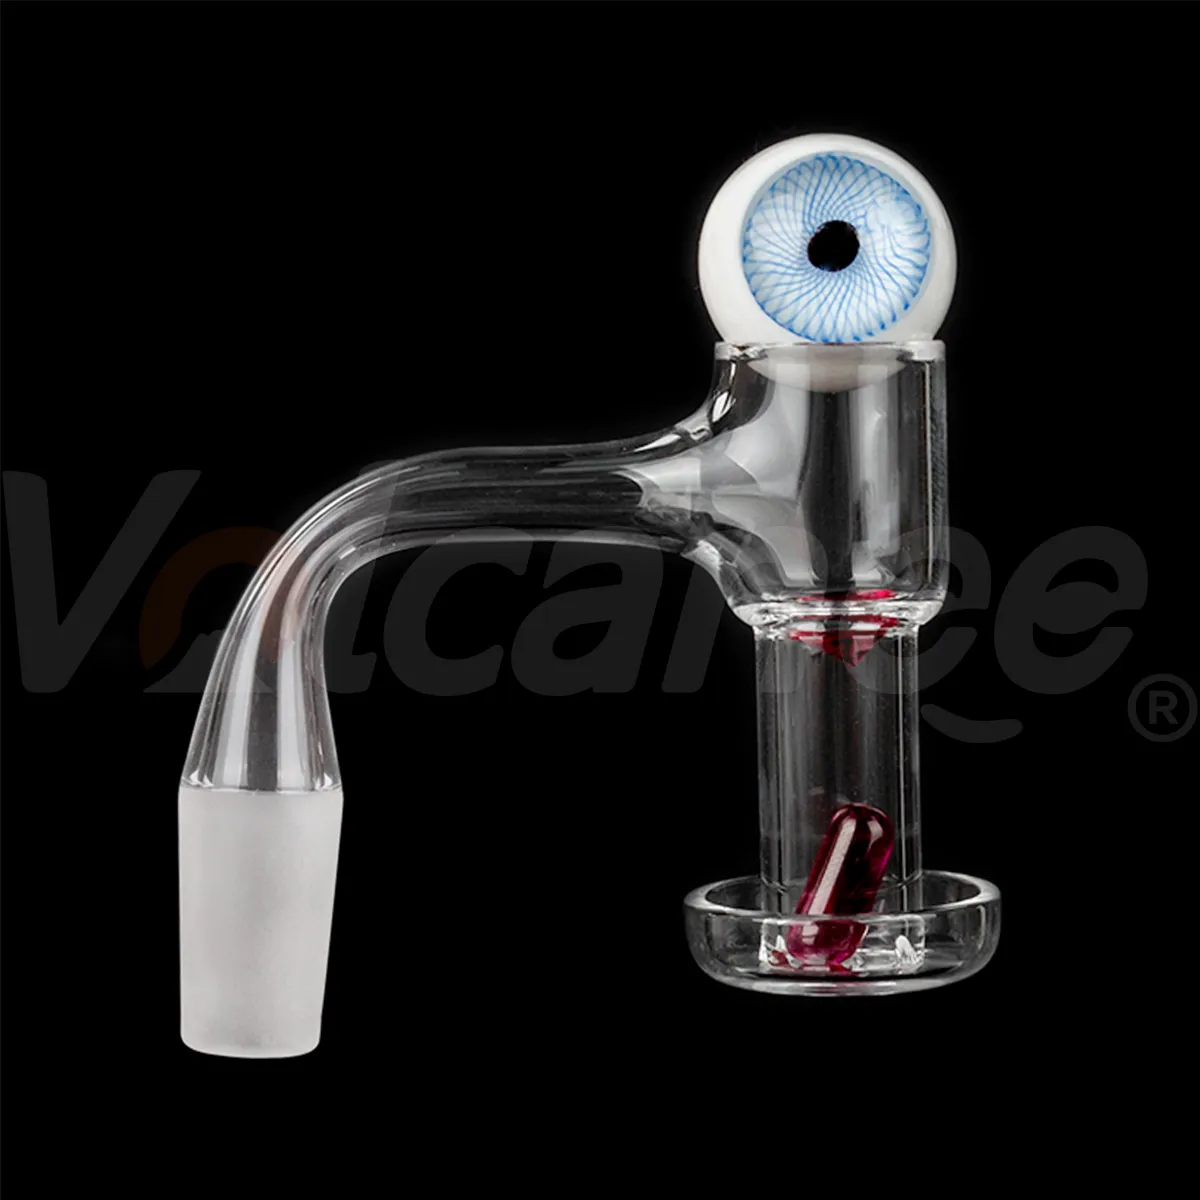 OD 20mm Beveled Edge Terp Slurper Smoking Quartz Banger With Pill/Glass Marble Ruby Pearls 45&90 Nails For Water Bongs Dab Rigs